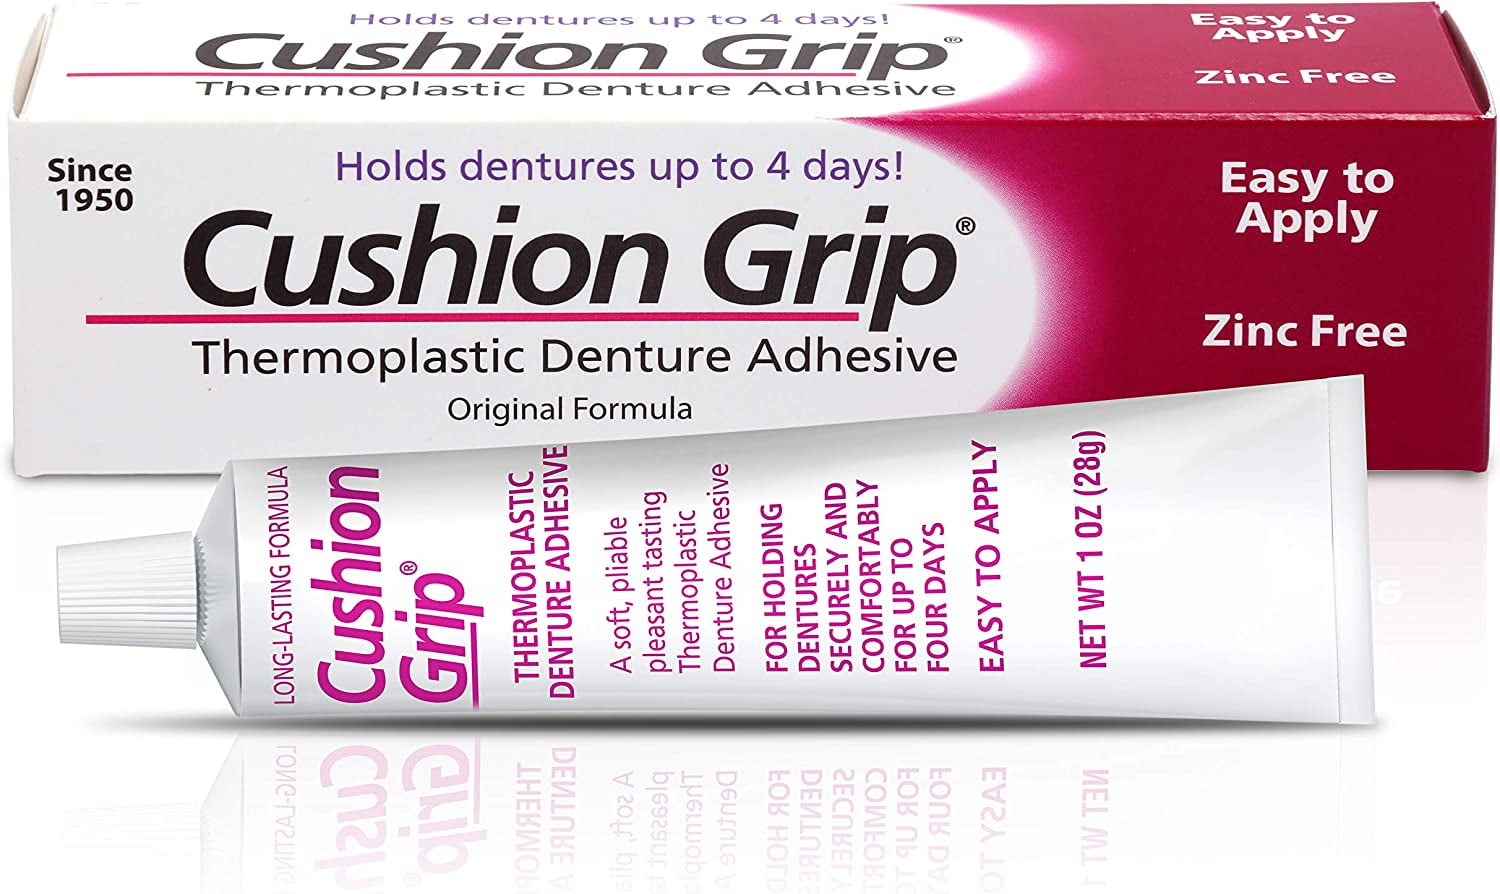 Cushion Grip TV Commercial, Tired of glue? Try something new! Discover the  best! Visit Trycushiongrip.com today!, By USpharma Ltd